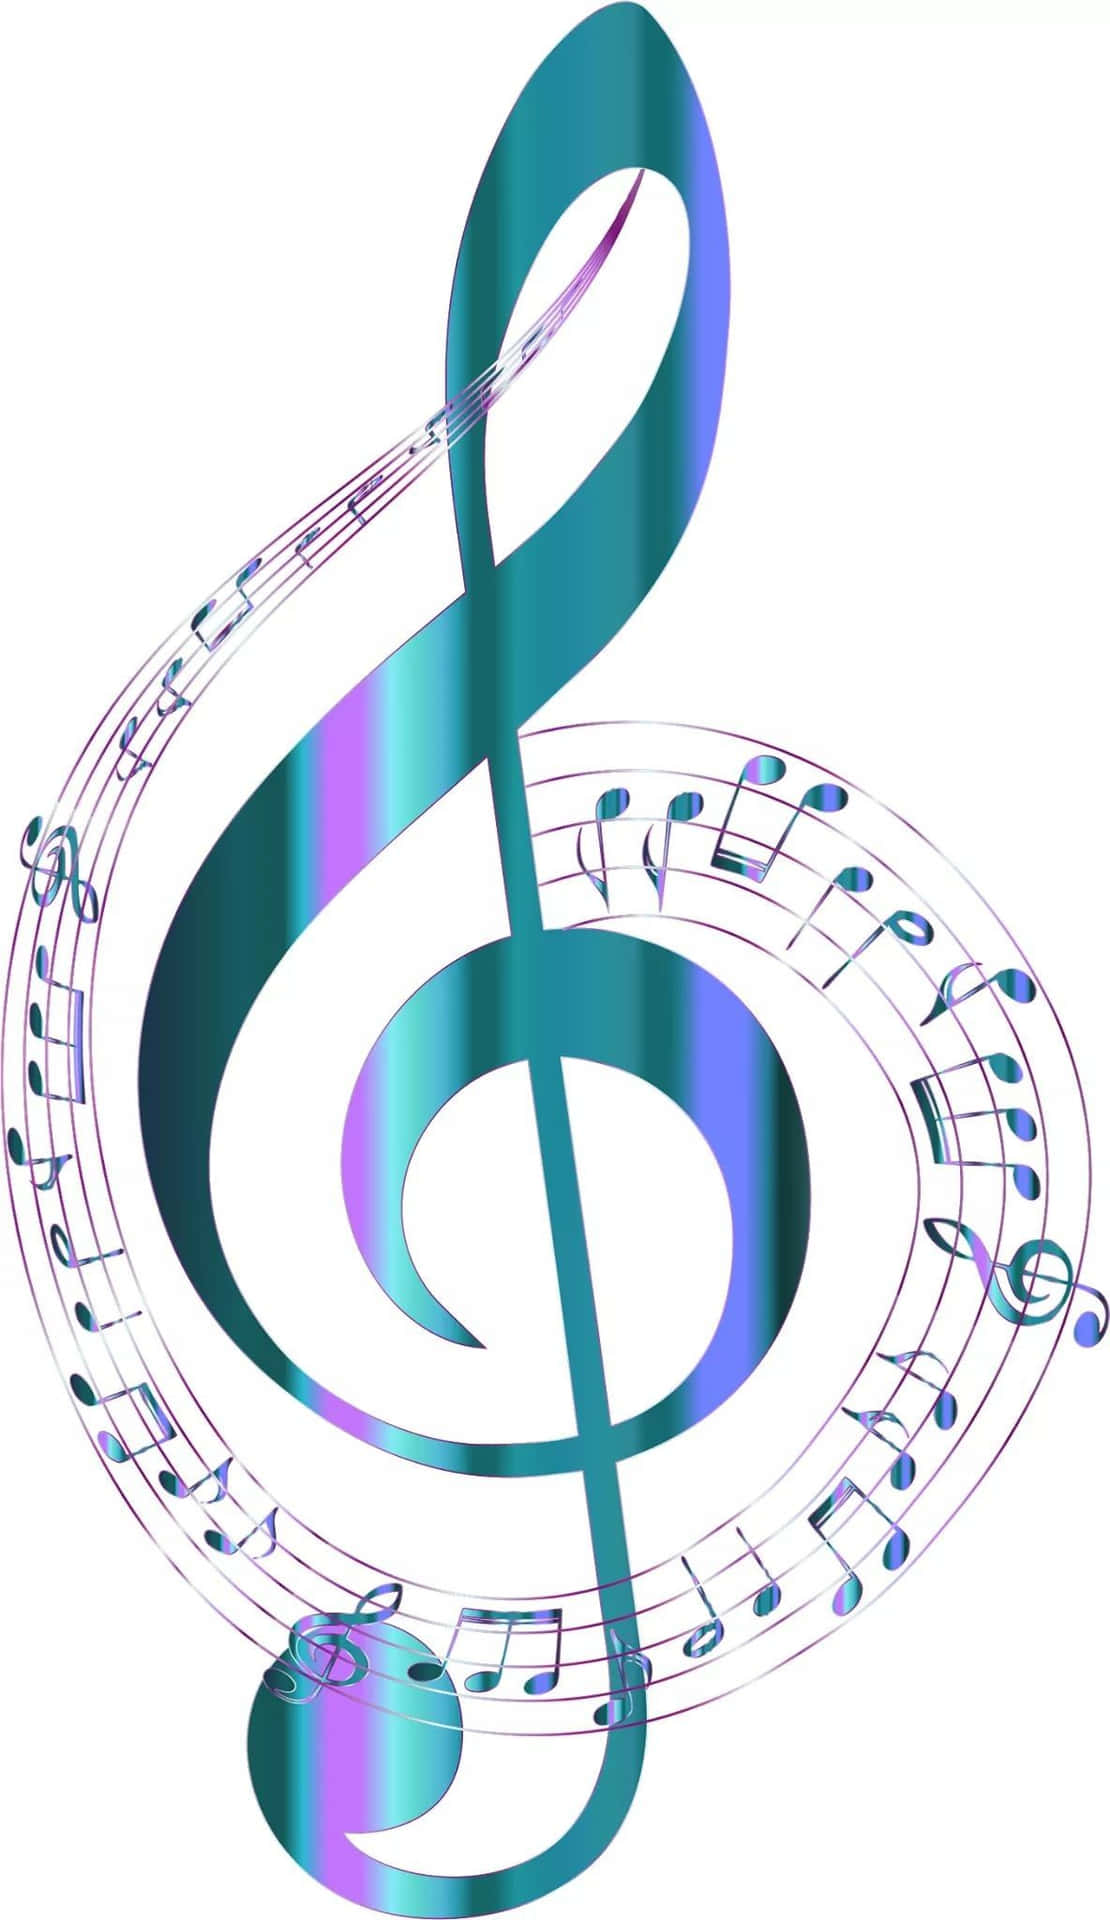 G Clef Symbol And Music Notes Background